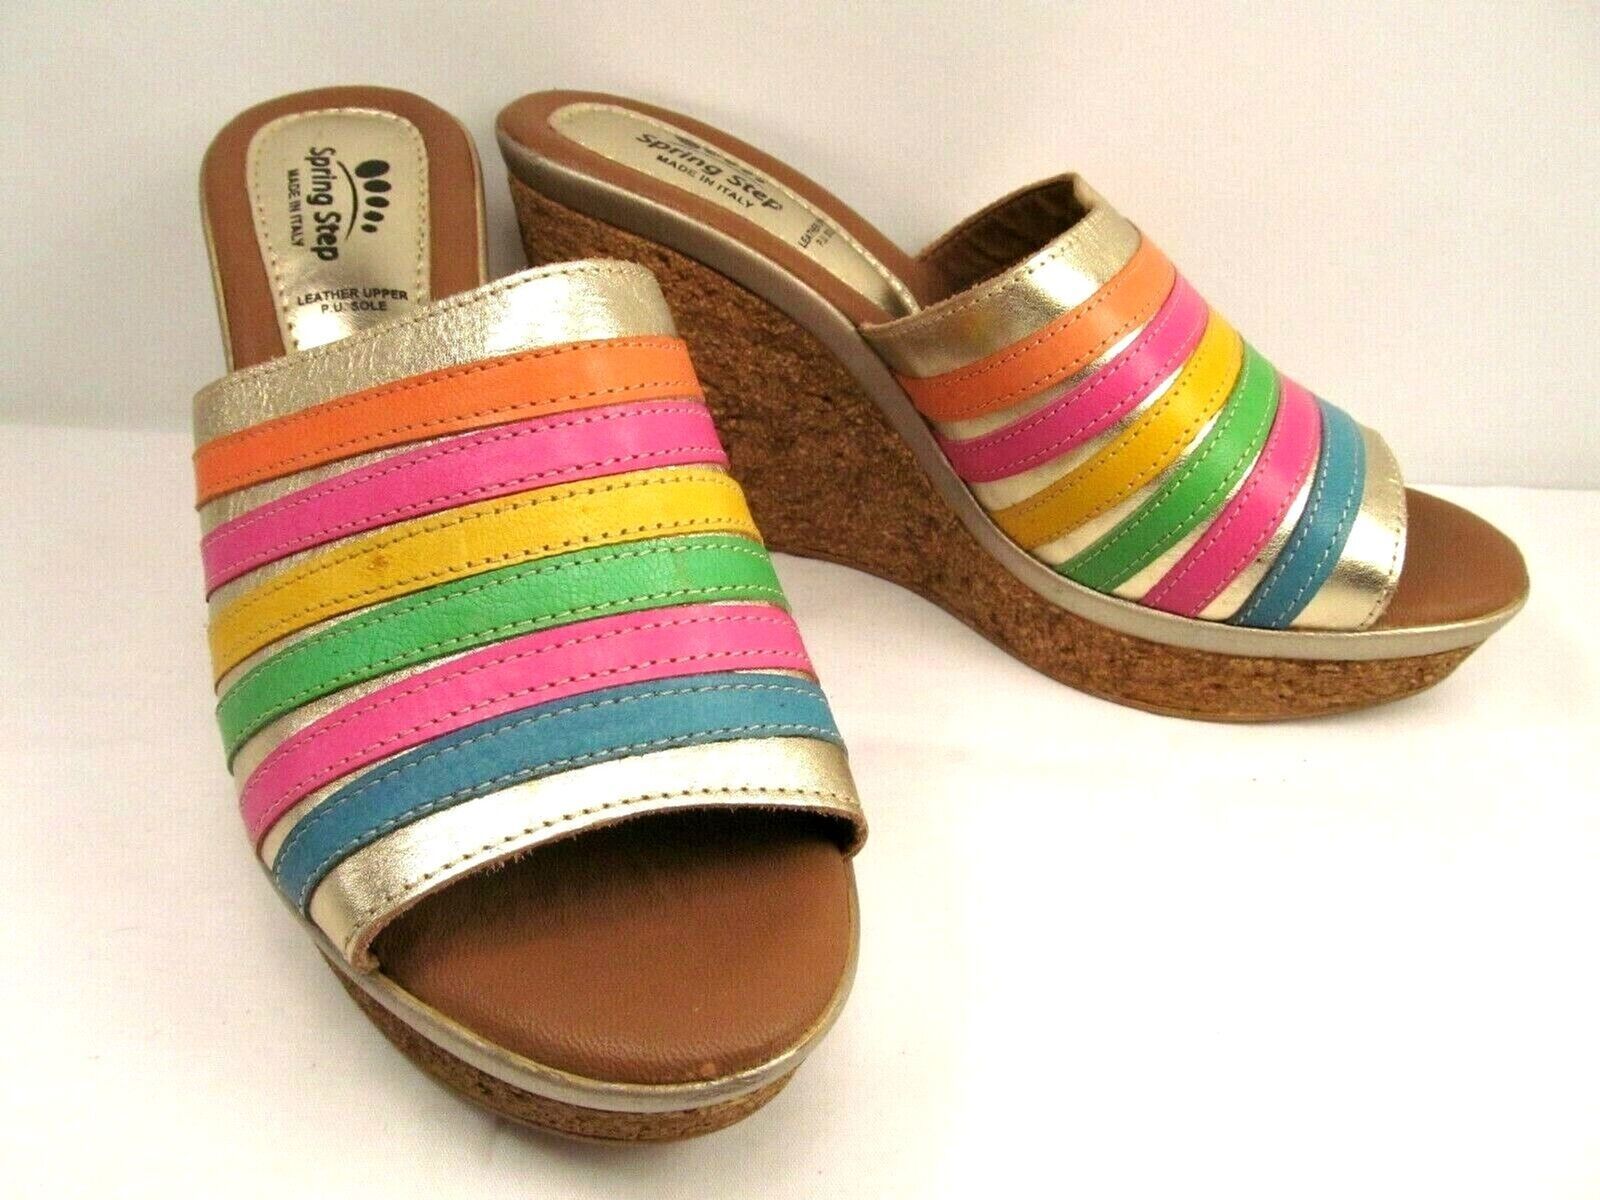 Primary image for Spring Step Italian Wedge Slip on Sandals Size US 8.5 EUR 39